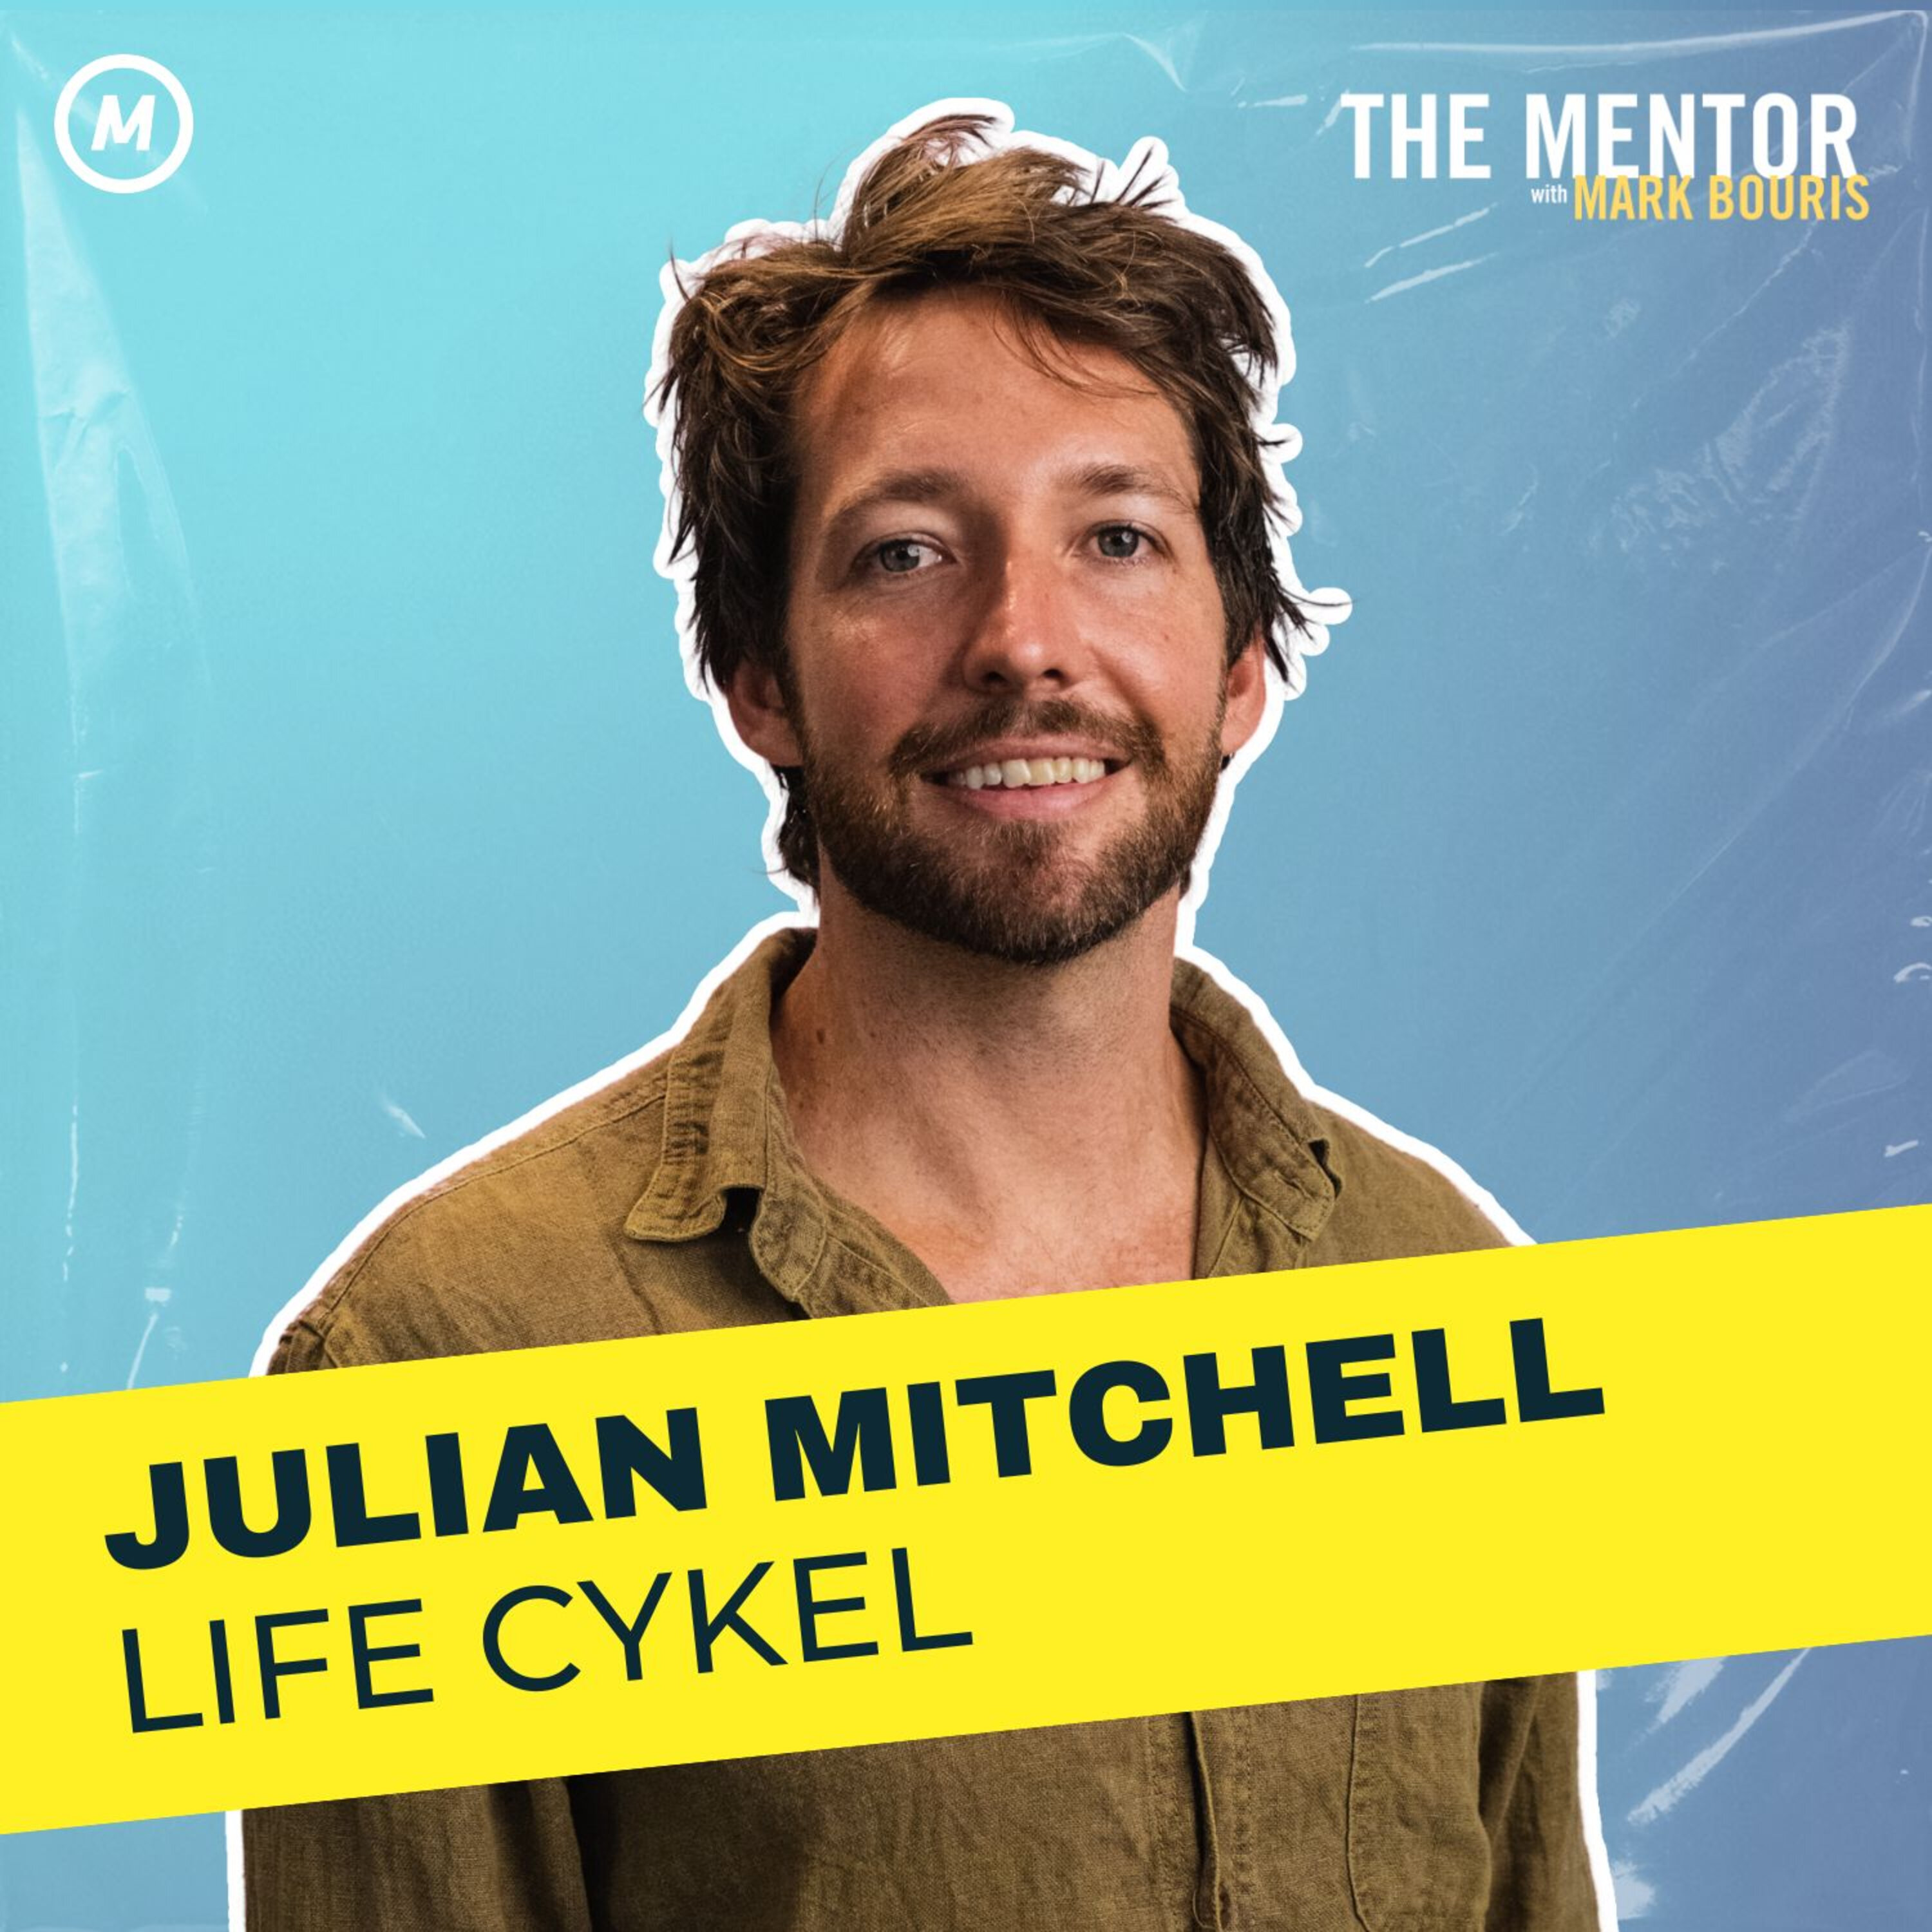 #373 The wellness market is predicted to be worth $1.5 trillion: Life Cykel